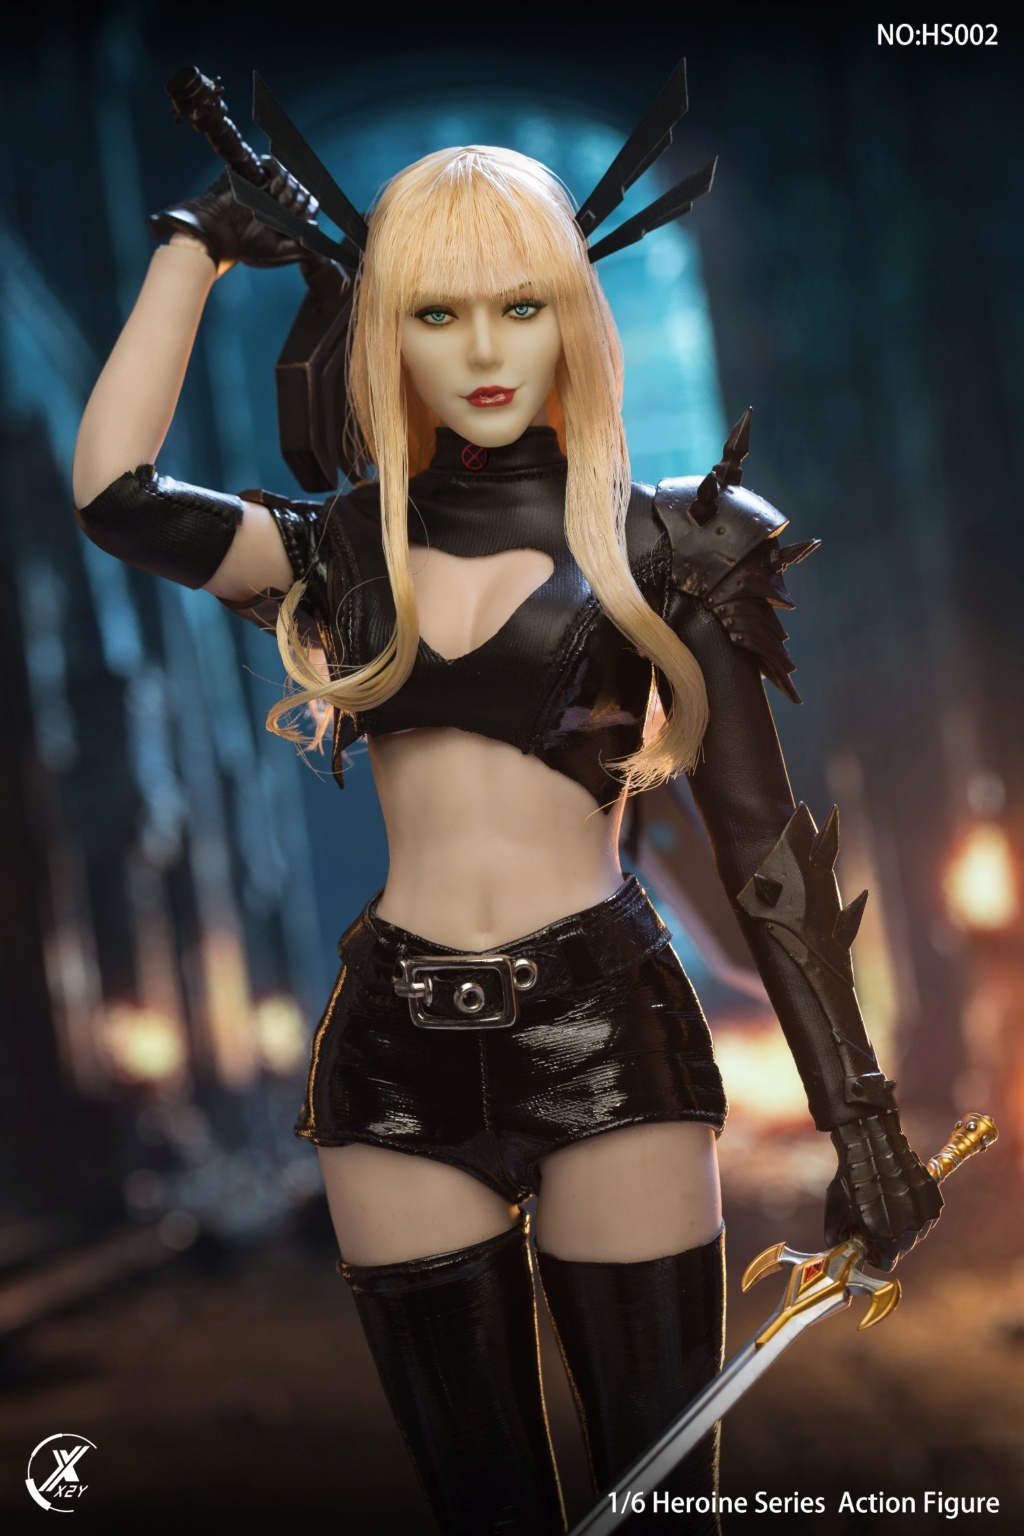 WarriorFromHell - NEW PRODUCT: X2Y TOYS: 1/6 Heroine Series - Mysterious Female Warrior from Hell Double-Headed Female Doll # HS002 11195511